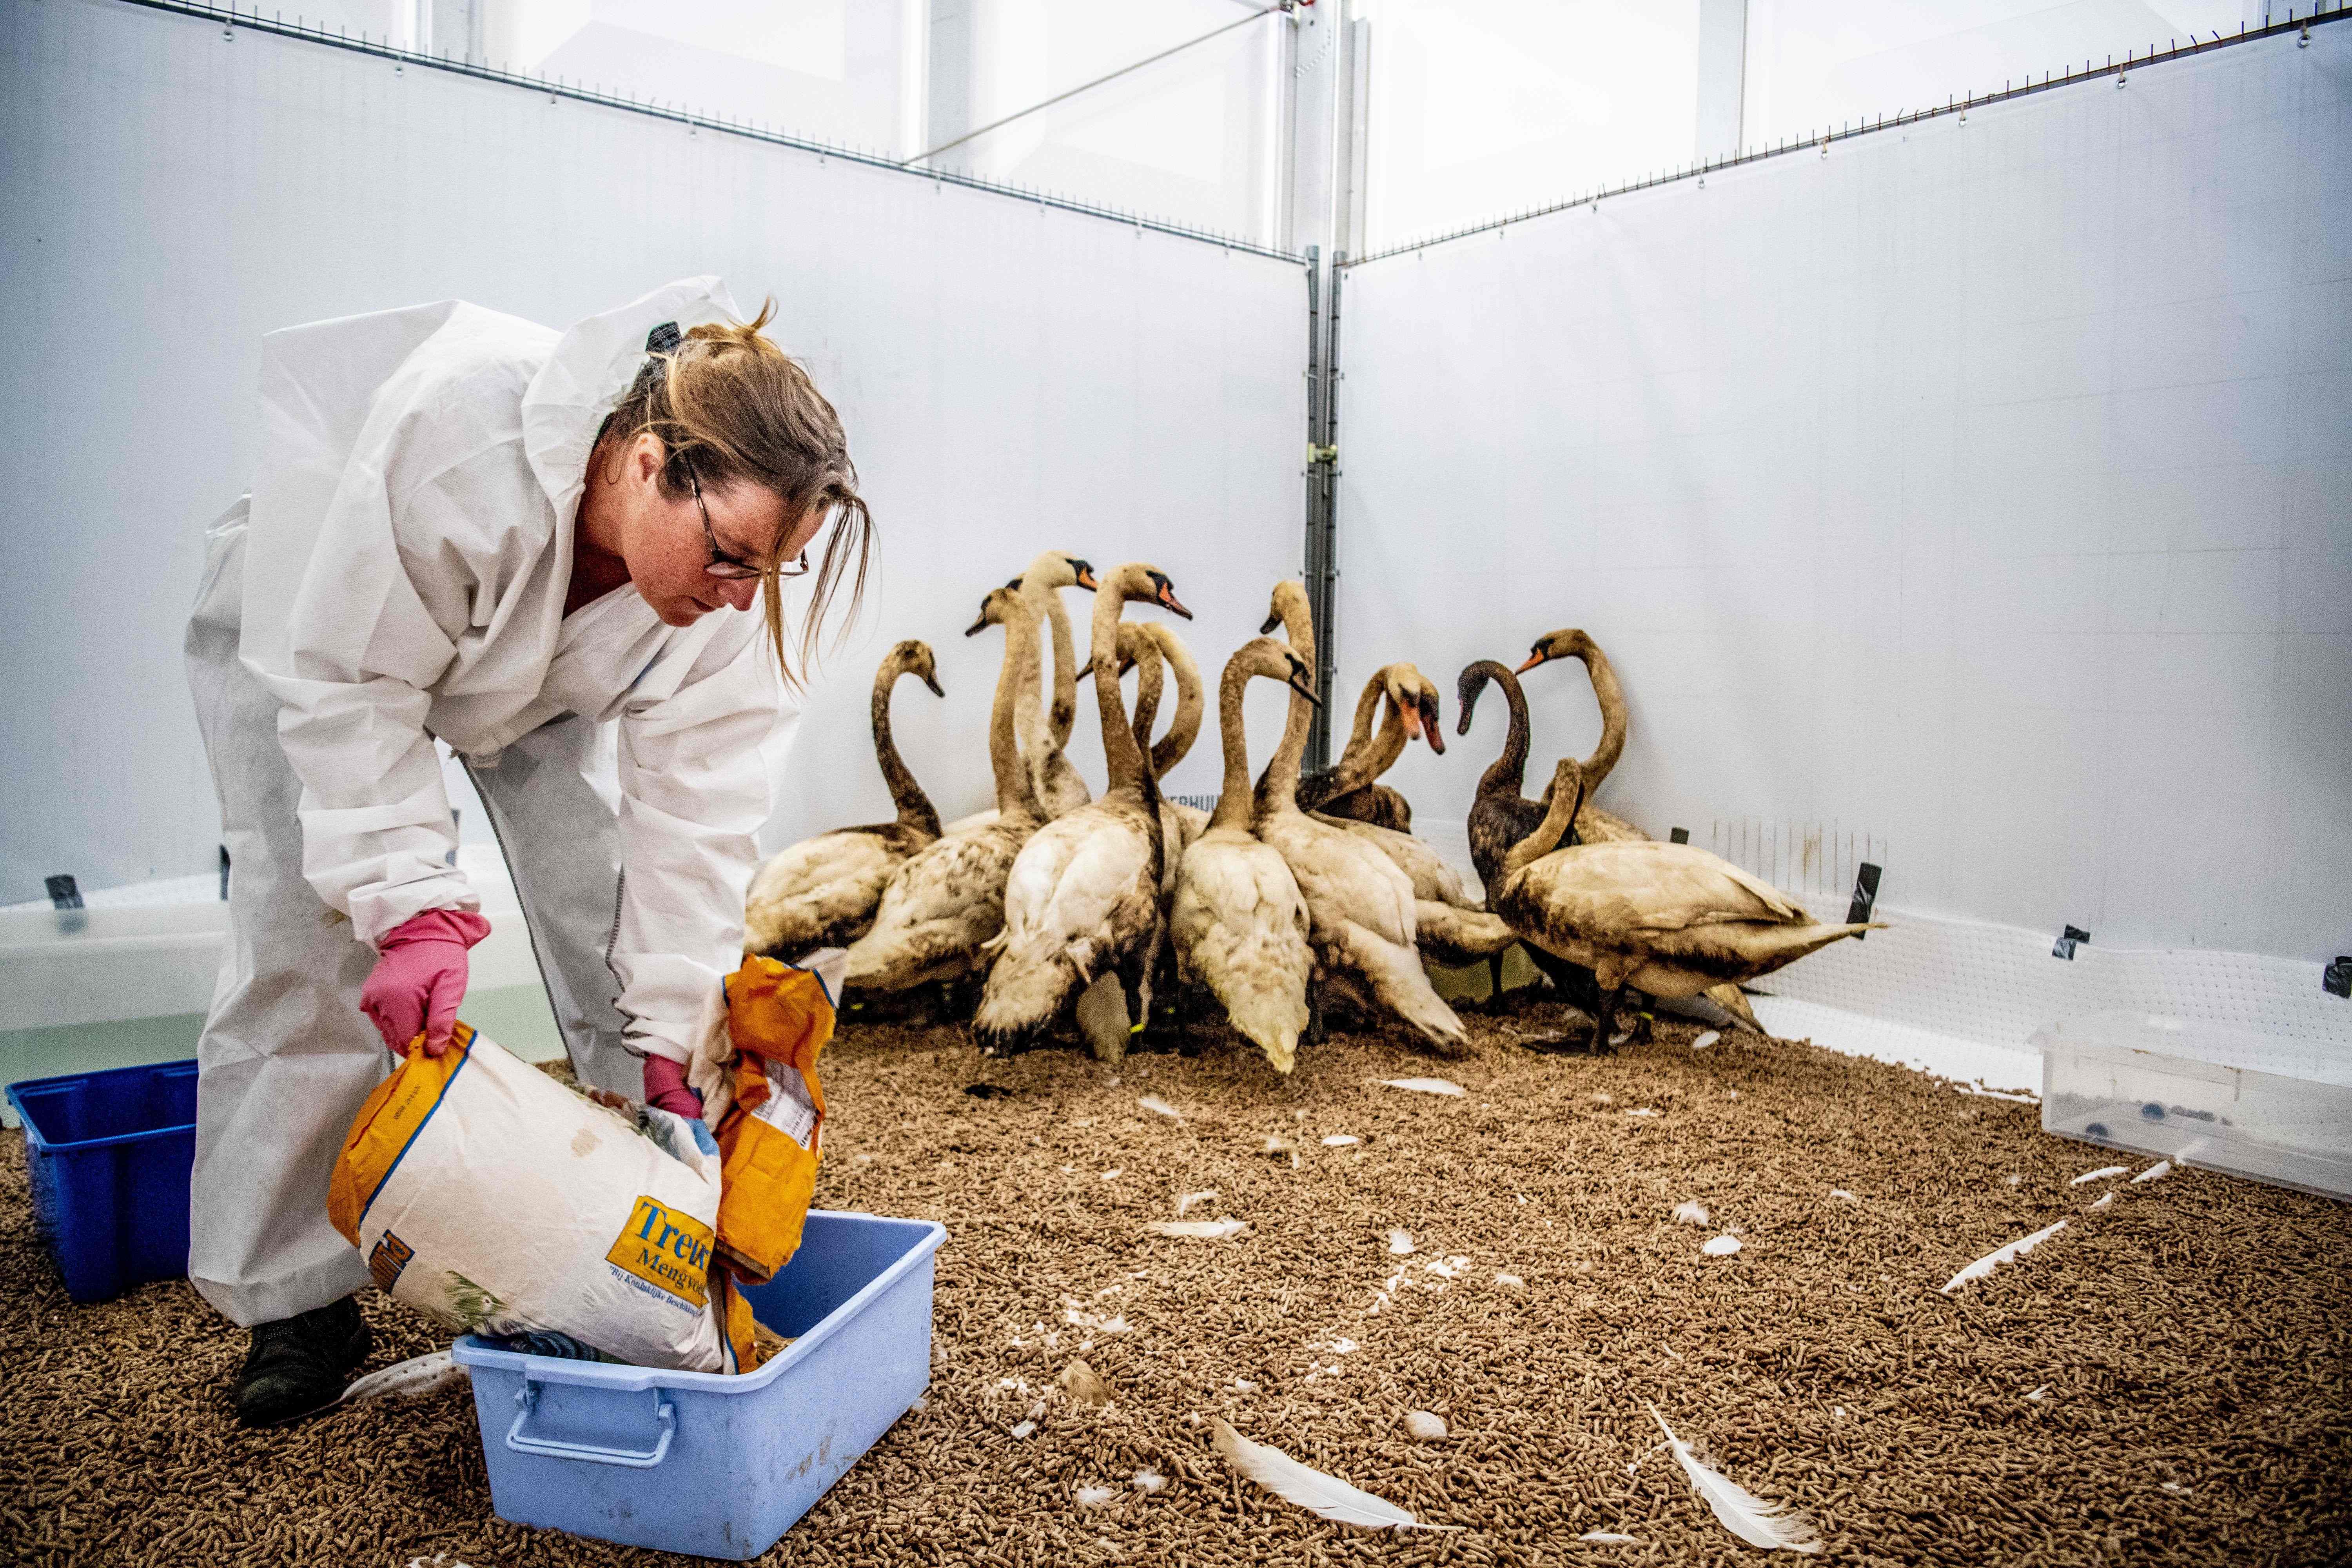 Swans covered in oil are fed by a rescue worker as they stand in a bird shelter near Hoek van Holland on June 26, 2018, after an accident when an oil tanker hit a jetty. Animal rescue workers are frantically cleaning hundreds of birds after an oil spill in the Rotterdam harbour at the weekend, when an oil tanker hit a jetty dumping some 200 tonnes of bunker fuel. The Norwegian tanker Bow Jubail crashed against a jetty in western Europe's largest port on June 23, spilling the heavy bunker fuel into the section of the harbour reserved for offloading petroleum, west of the city. / AFP PHOTO / ANP / Robin Utrecht / Netherlands OUT